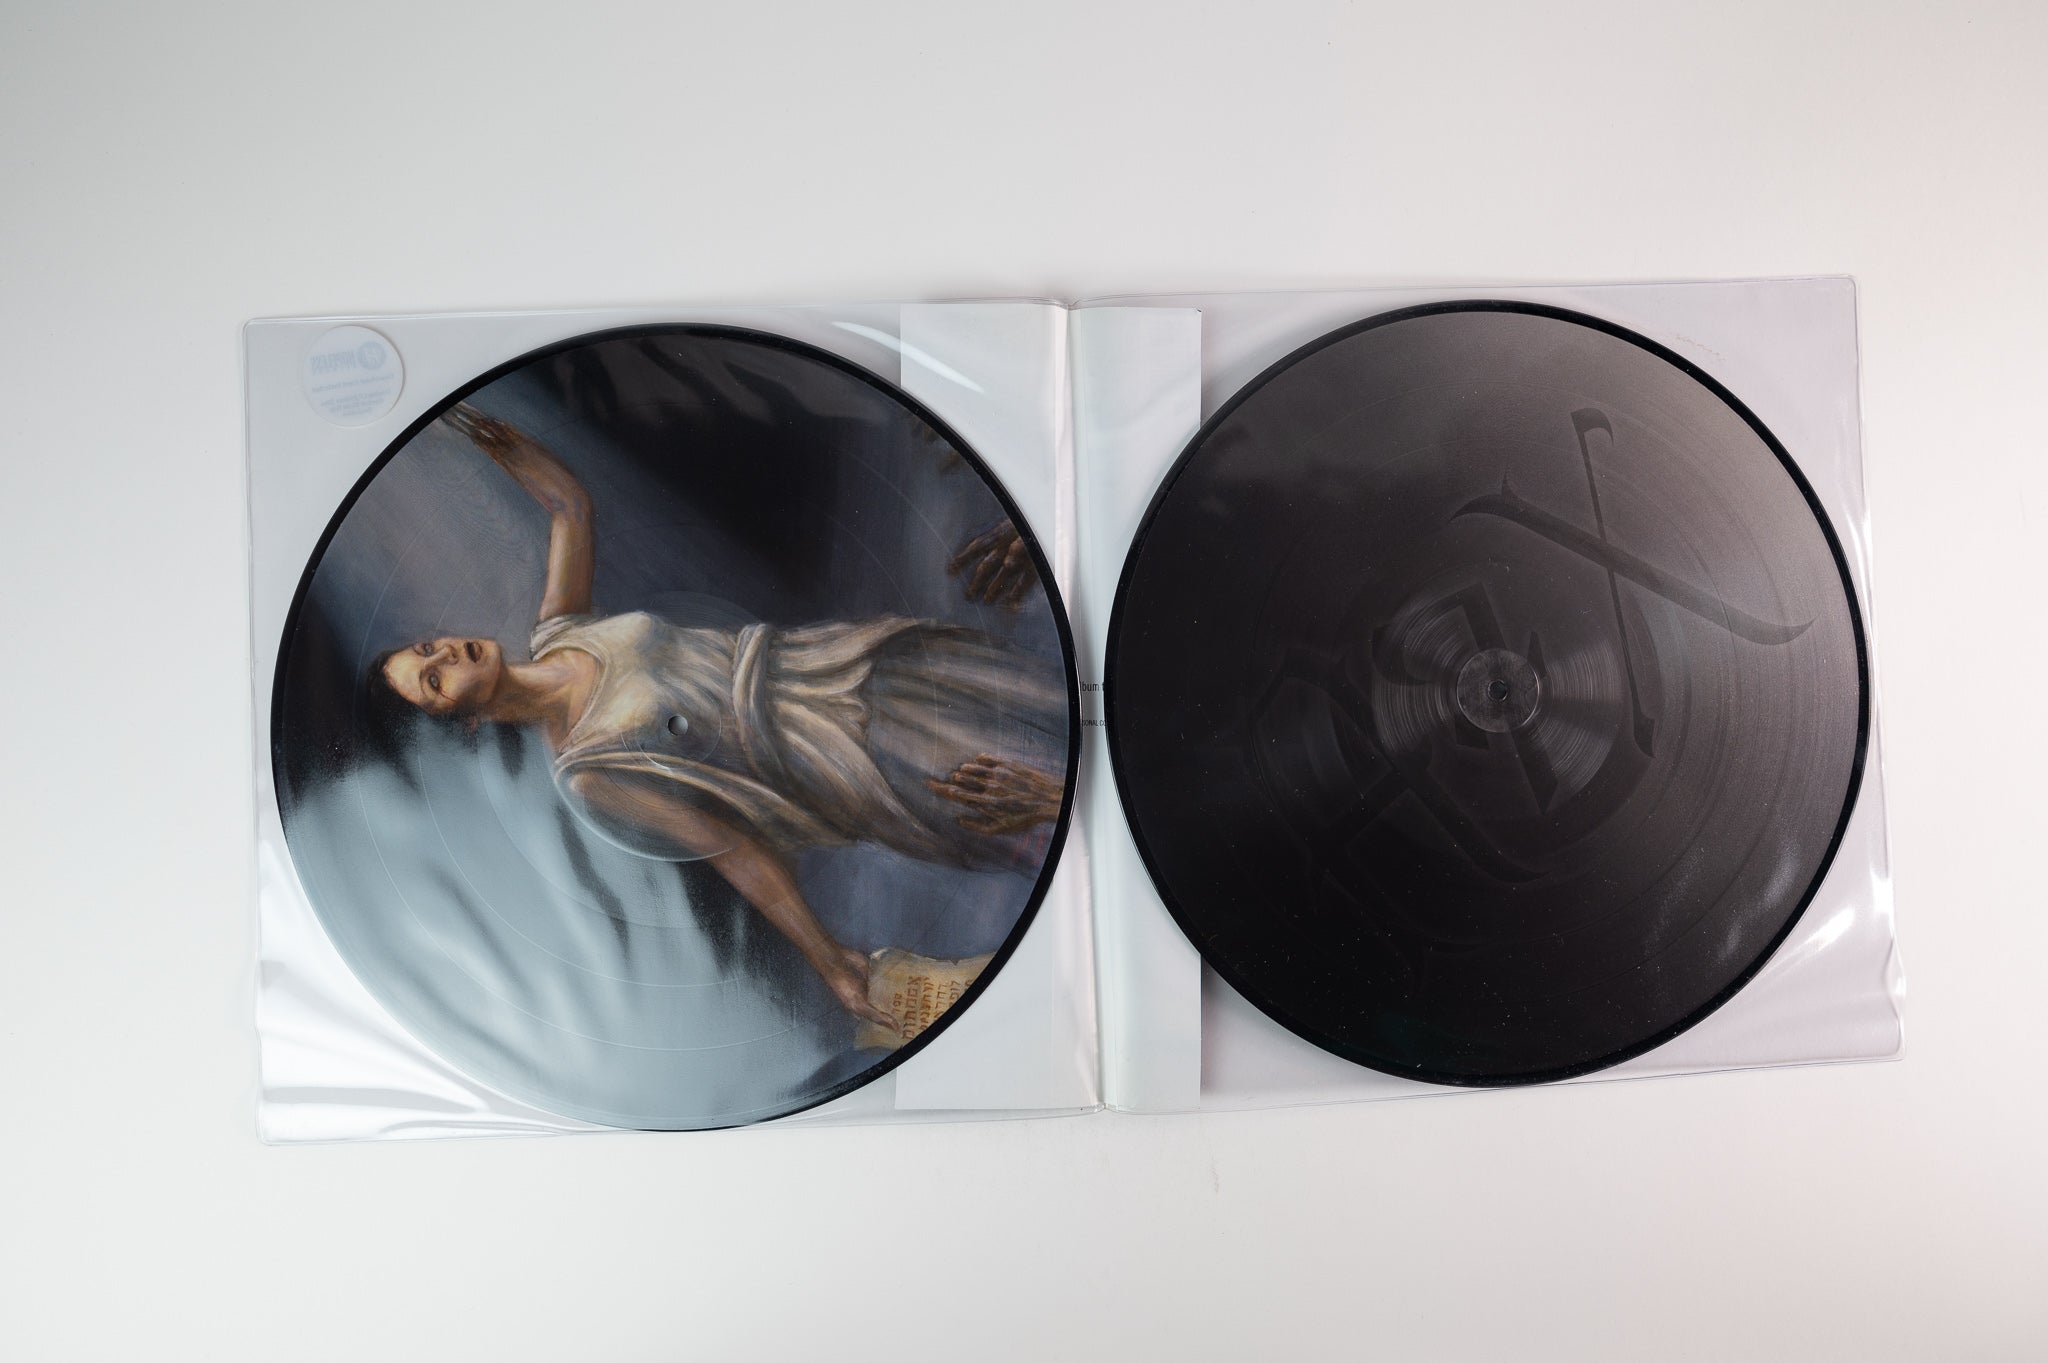 Avenged Sevenfold - Waking The Fallen on Hopeless Records - Picture Disc